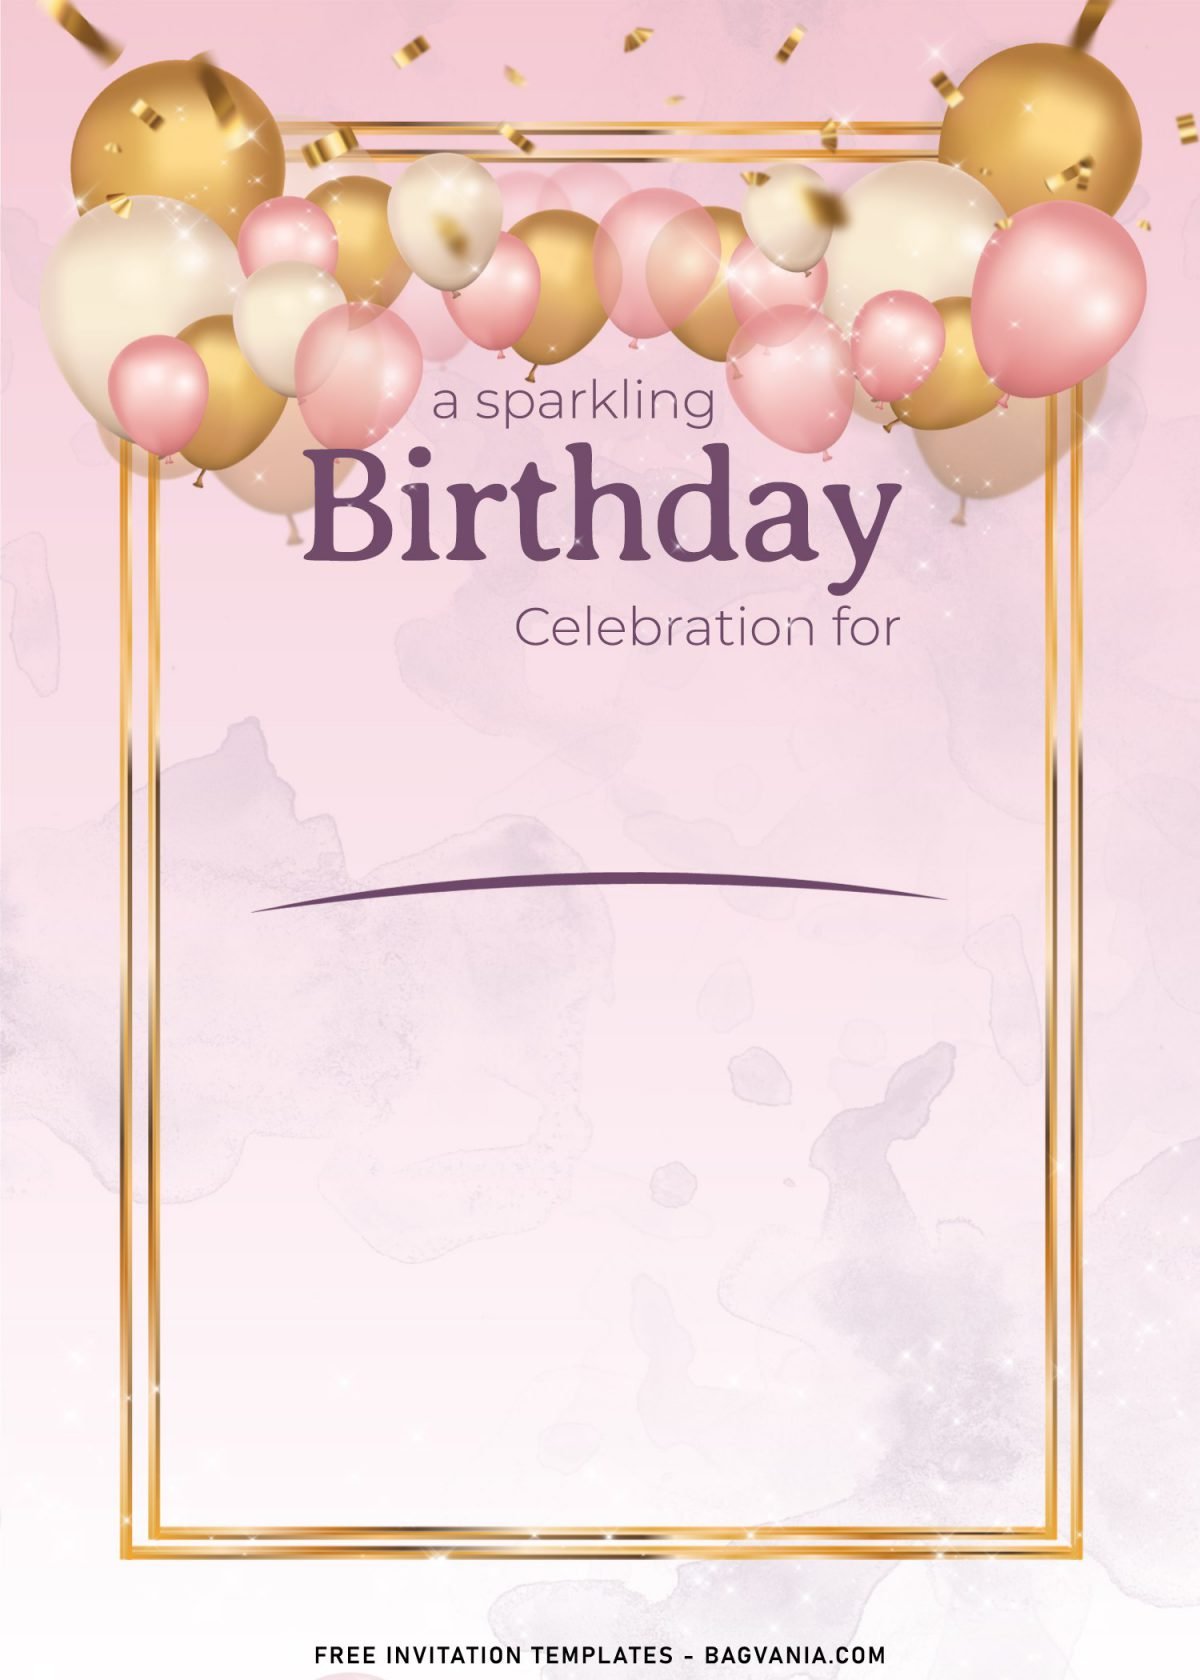 10+ Sparkling Balloons Birthday Invitation Templates Suitable For All Ages with portrait orientation design